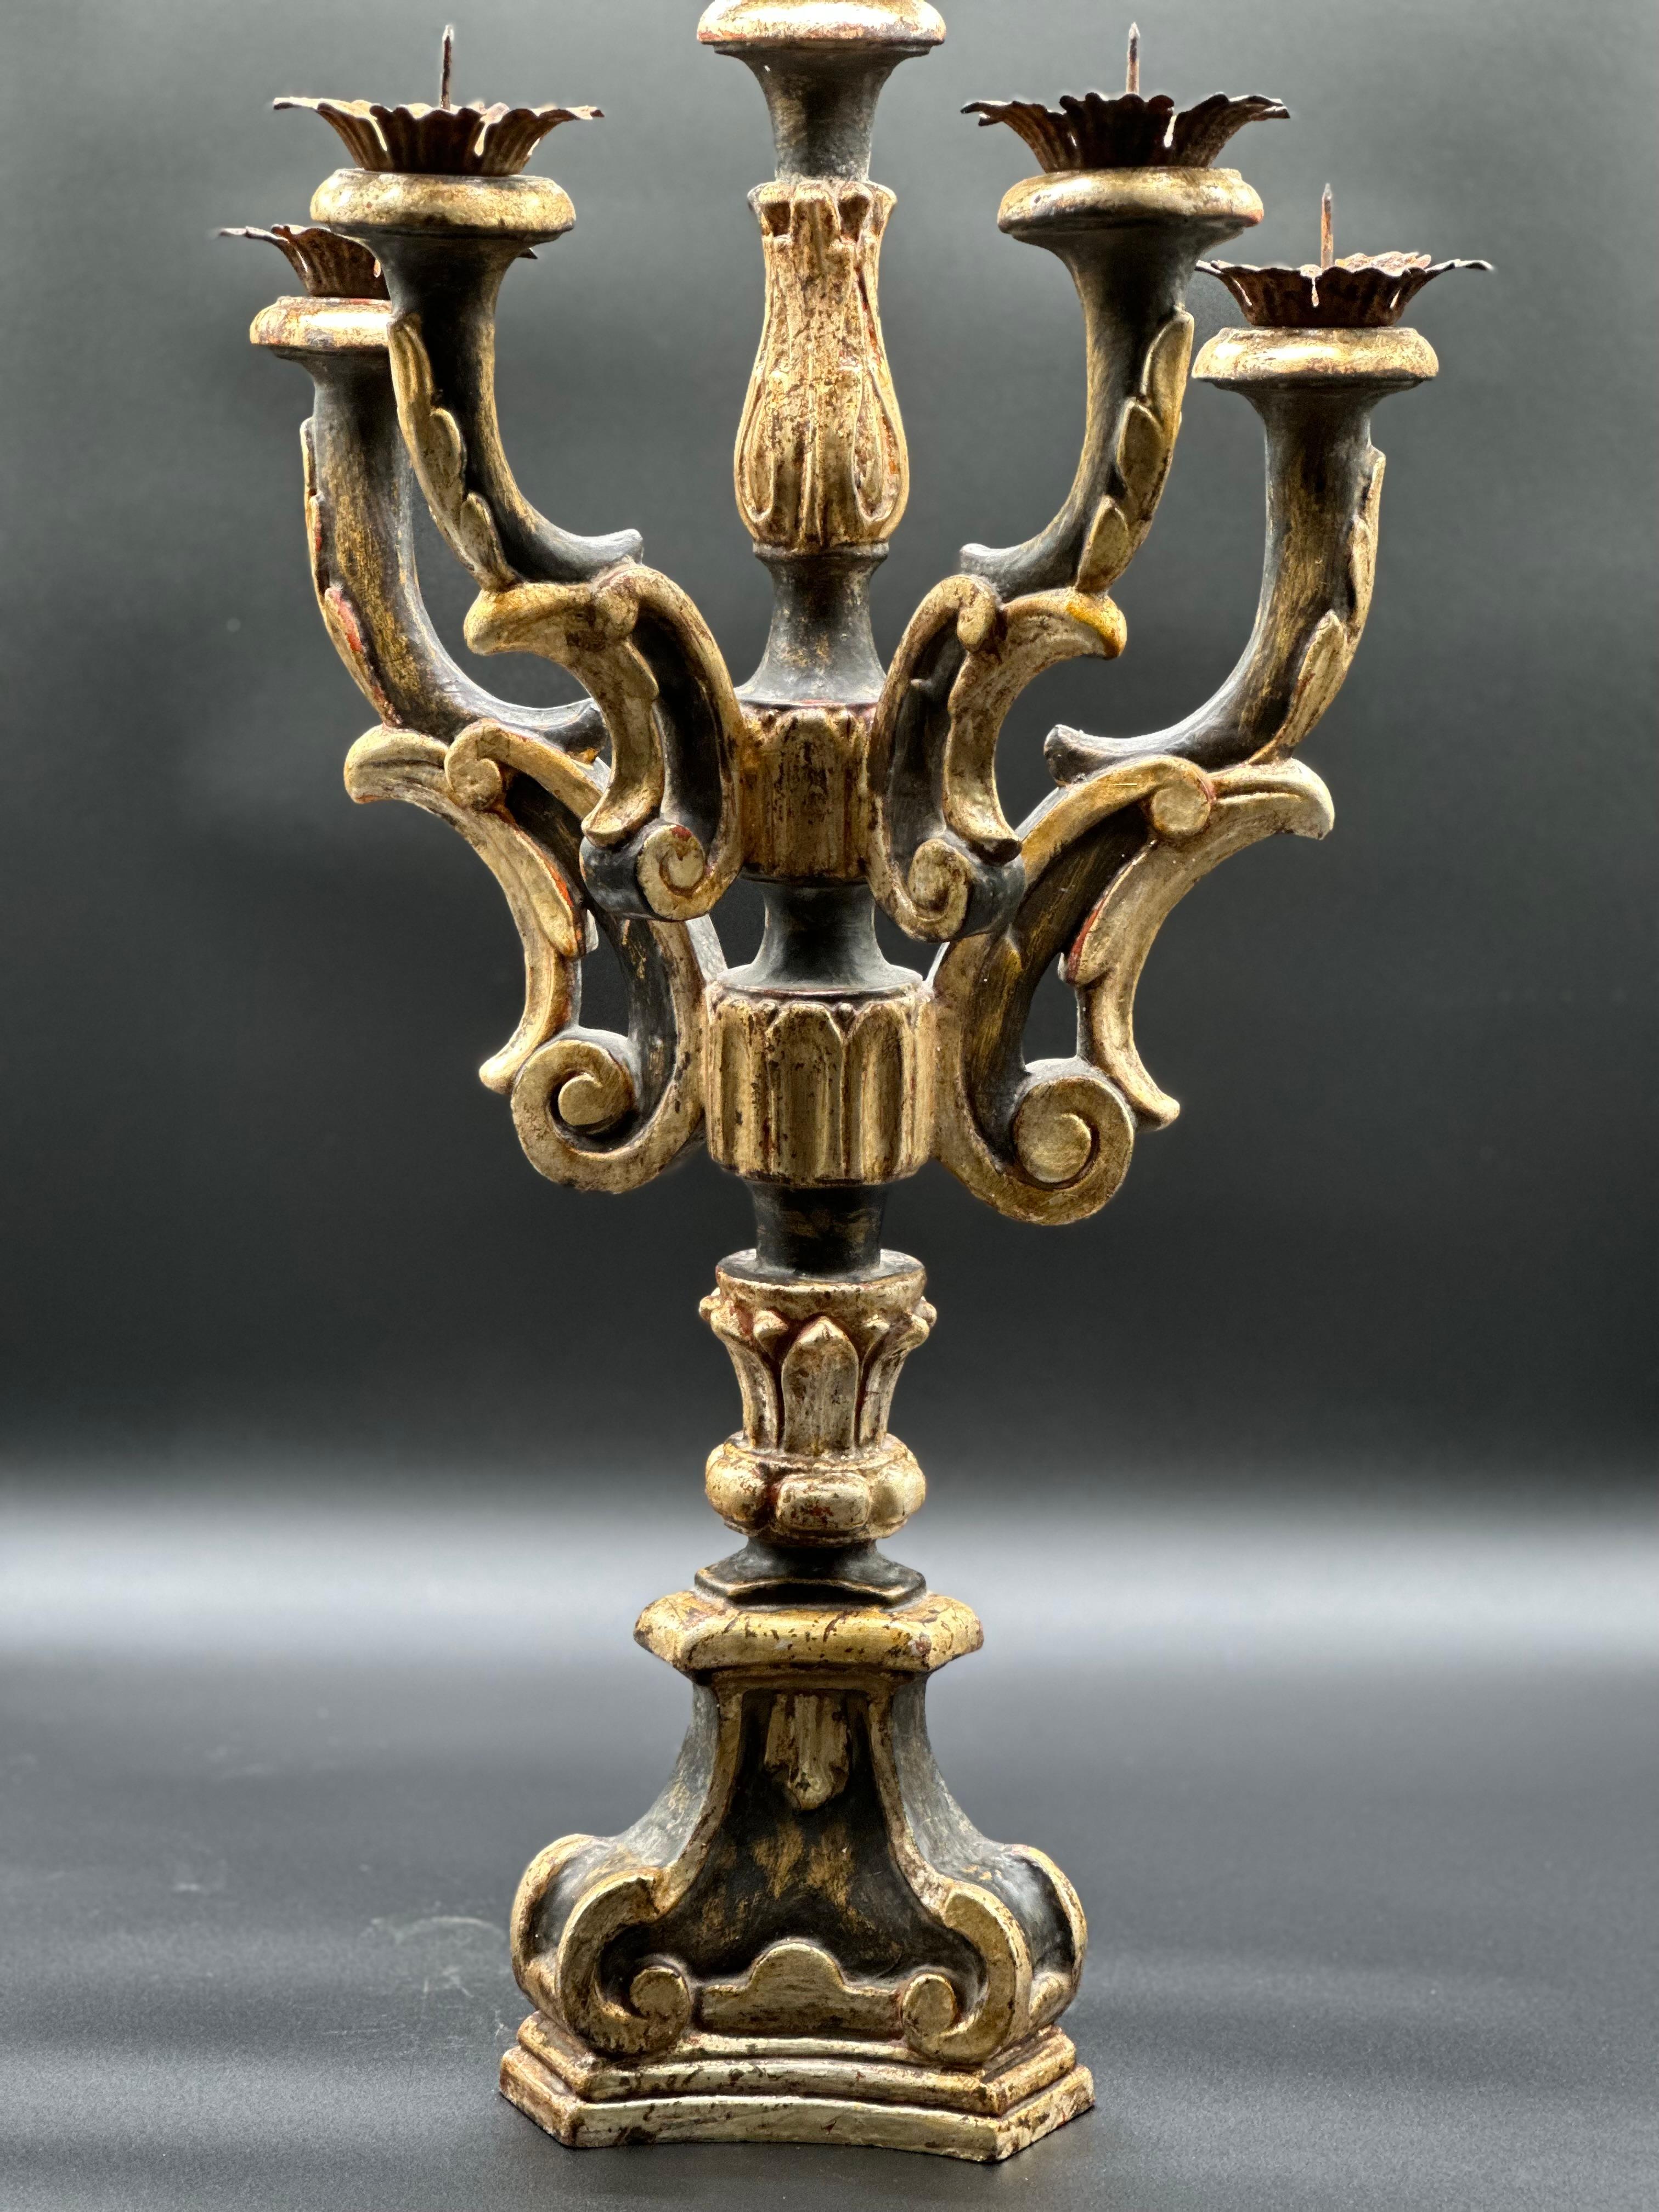 Pair of black and gold gilt candelabras. Amazing condition. Add drama to any space. c1880